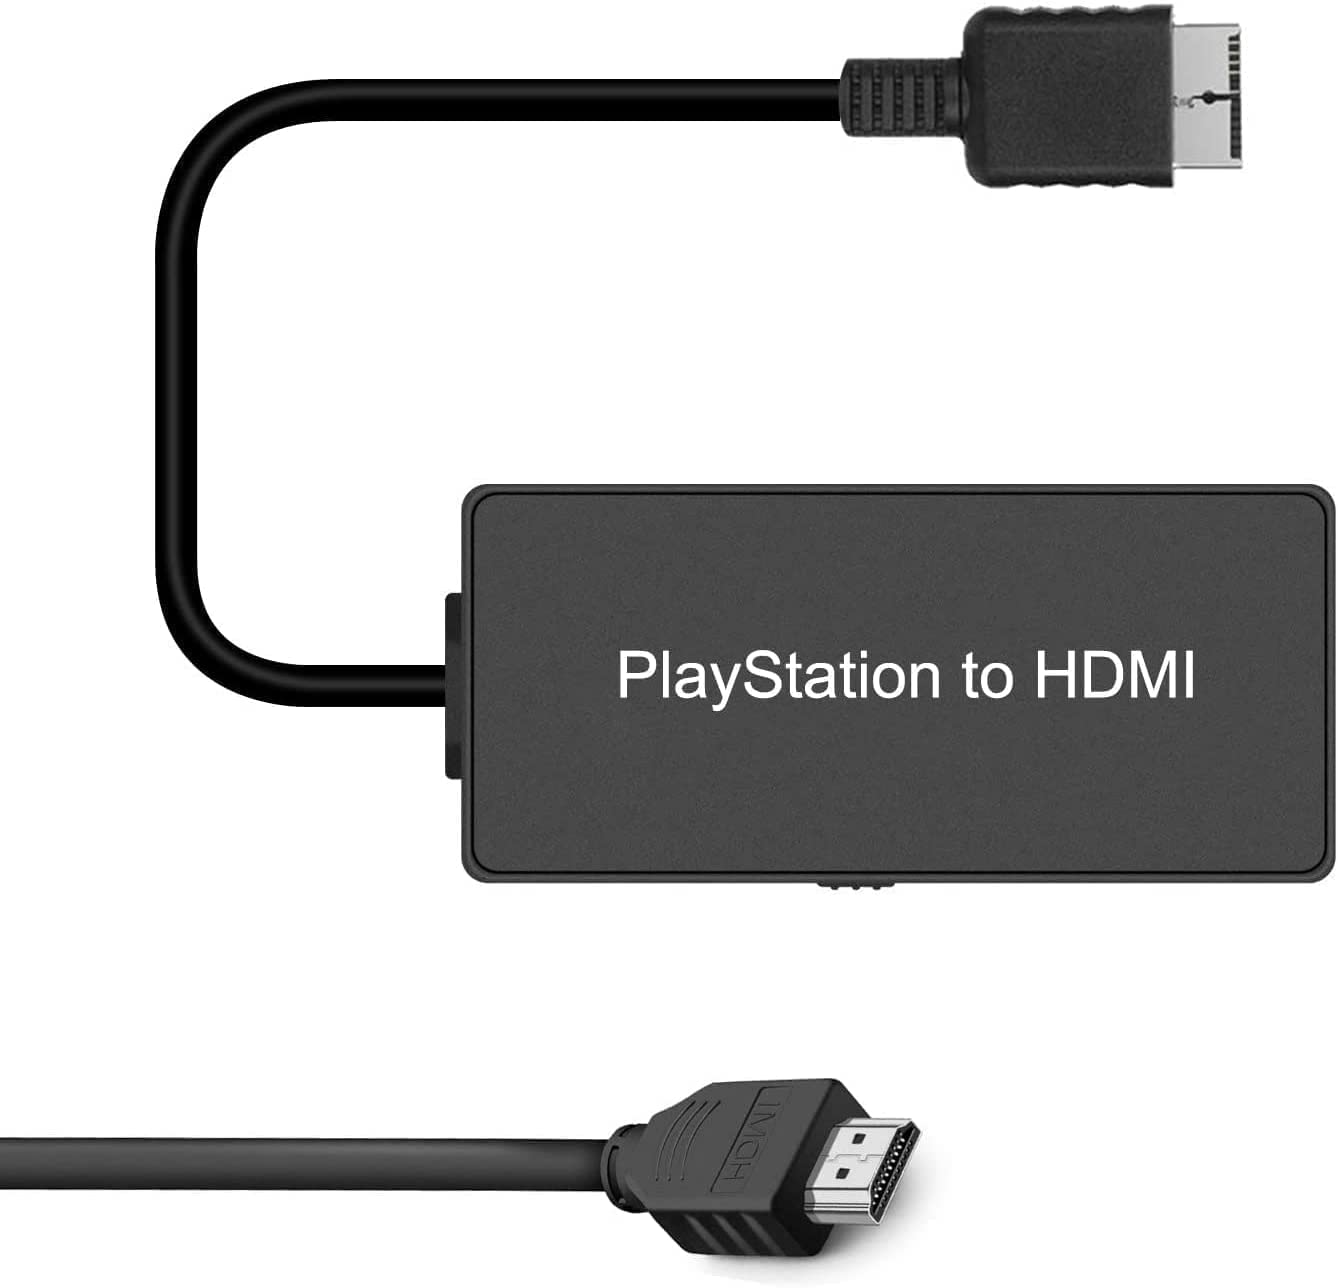 Azduou Playstation 2 (PS2) to HDMI Converter, HDMI Cable for Playstation 2, Playstation 3 Console (PS2, PS3), Connecting PS2/PS3 to HDTV with True Ypbpr HD Signal Output (100% Improve Video Quality)